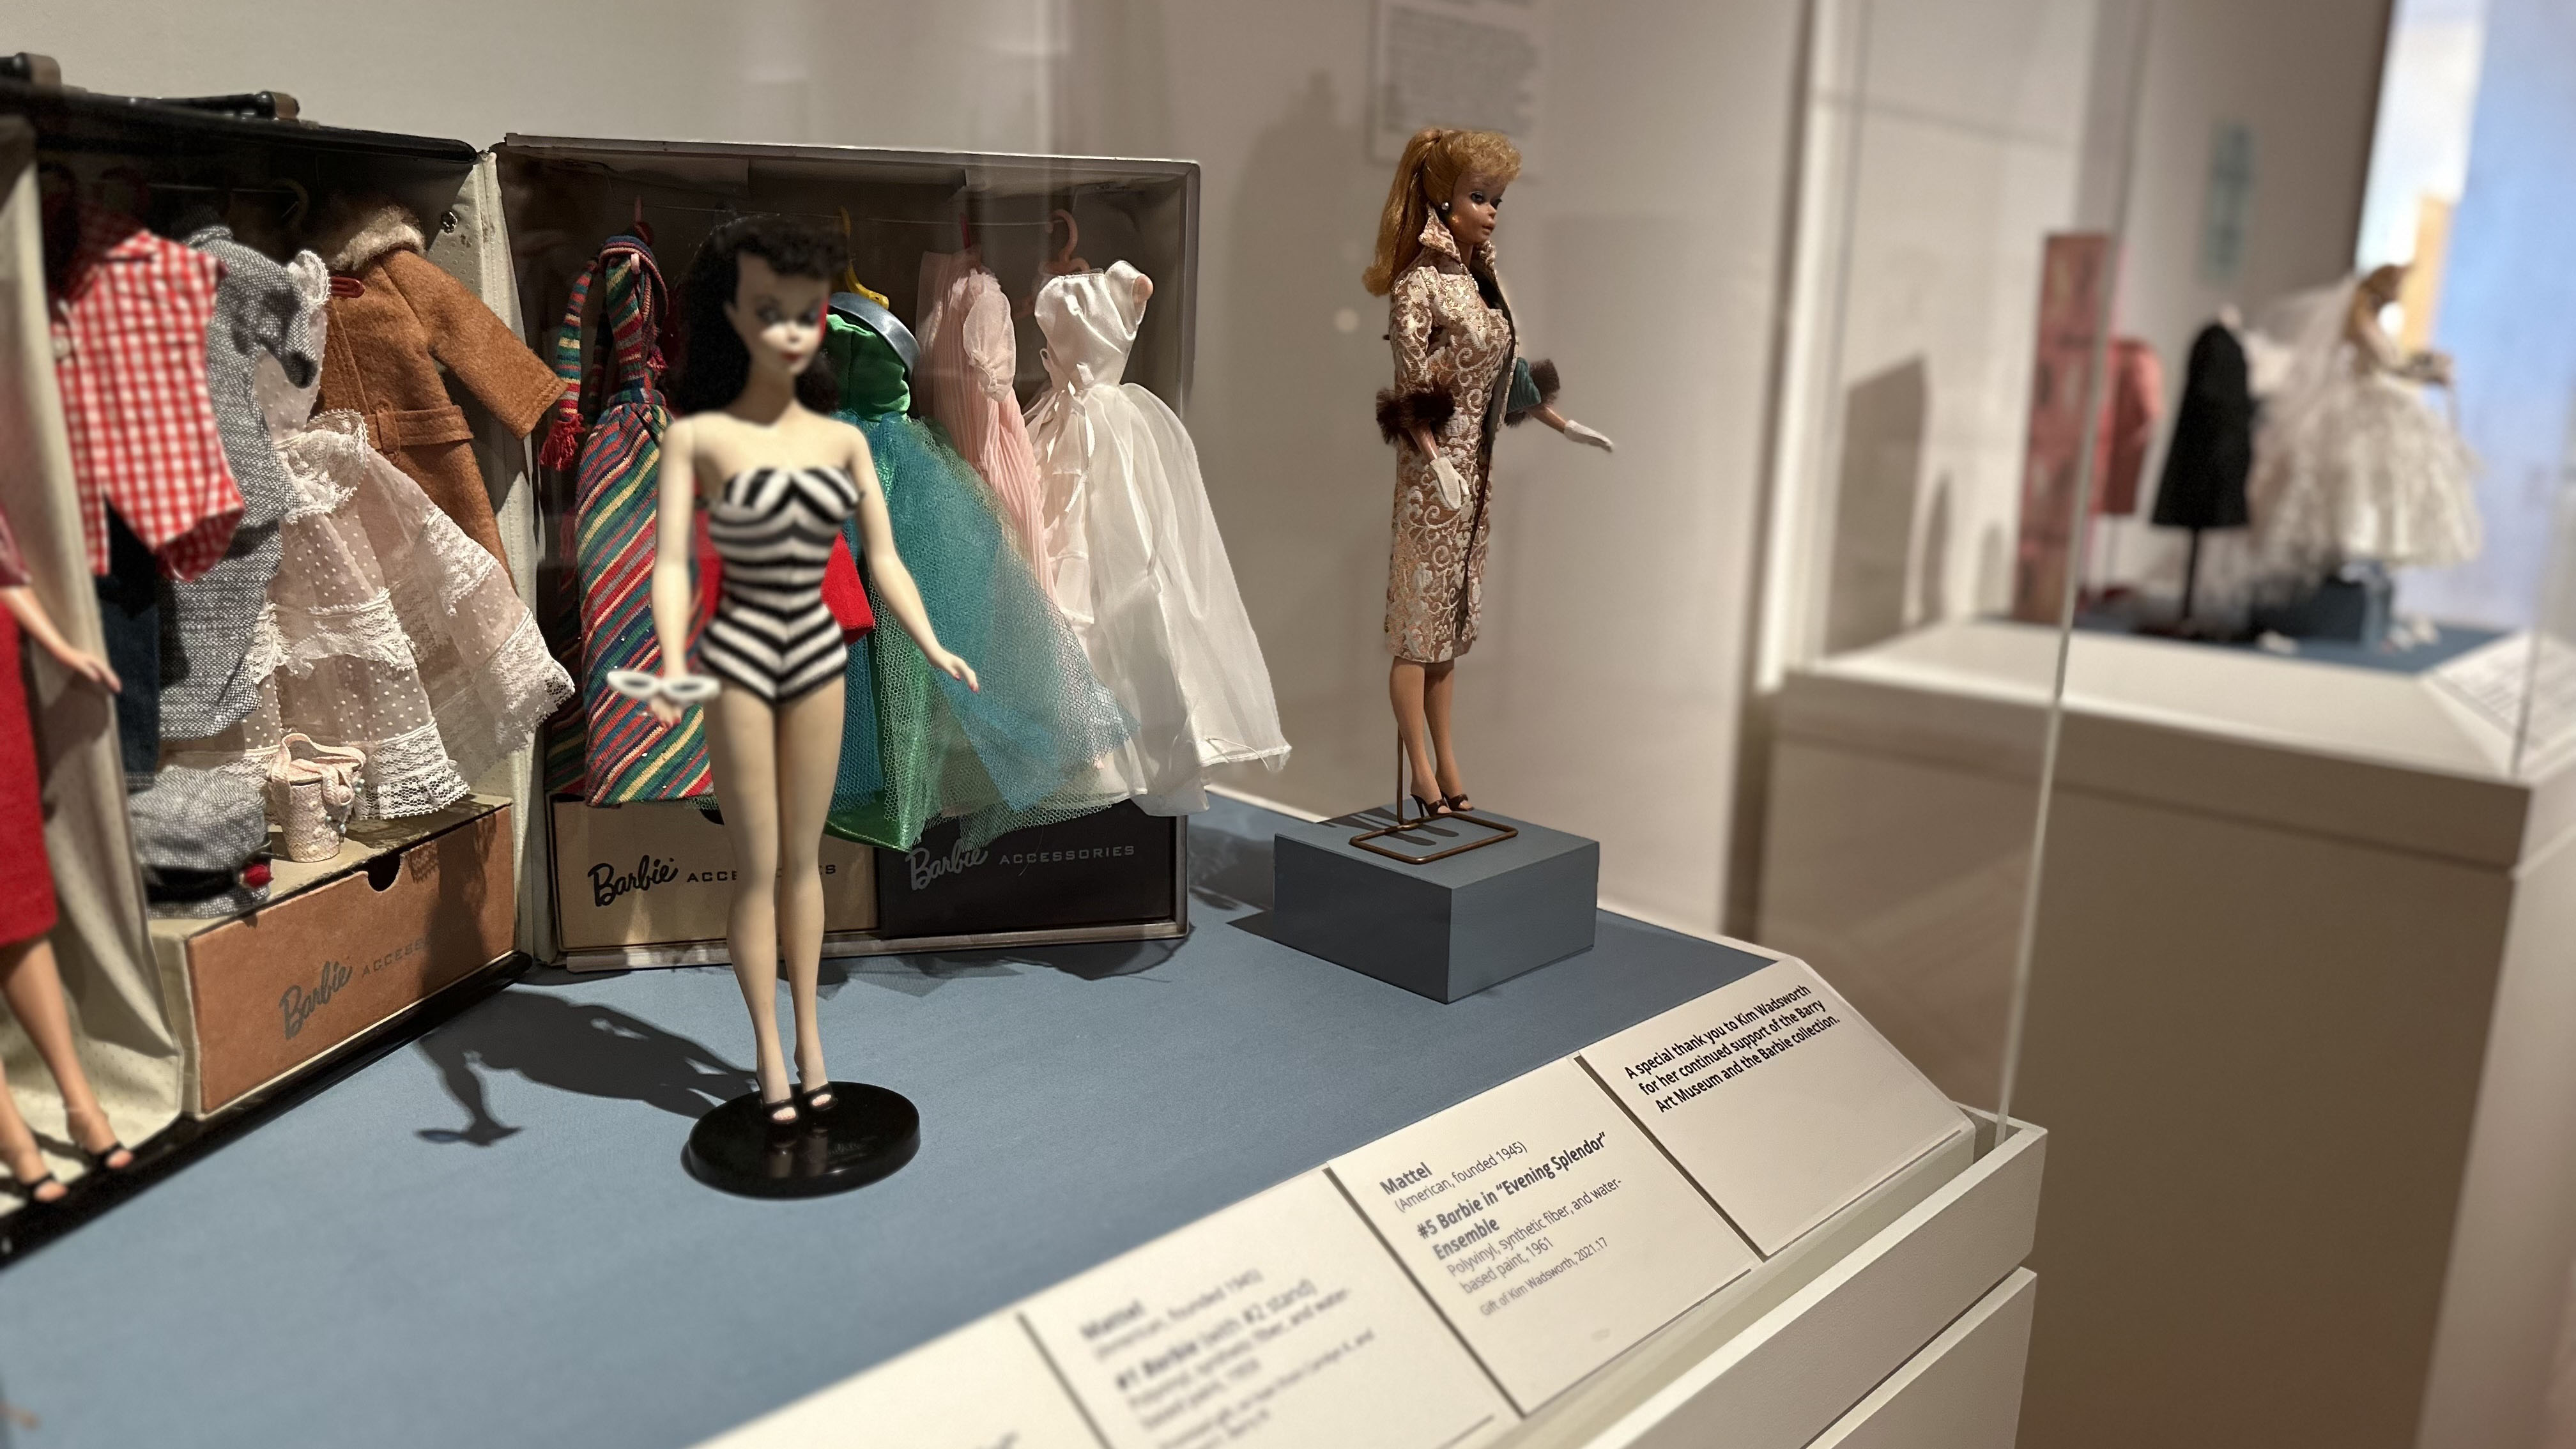 The ODU Barry Art Museum included historic and rare Barbies in its exhibit about the history of dolls. (Photo by Mechelle Hankerson)